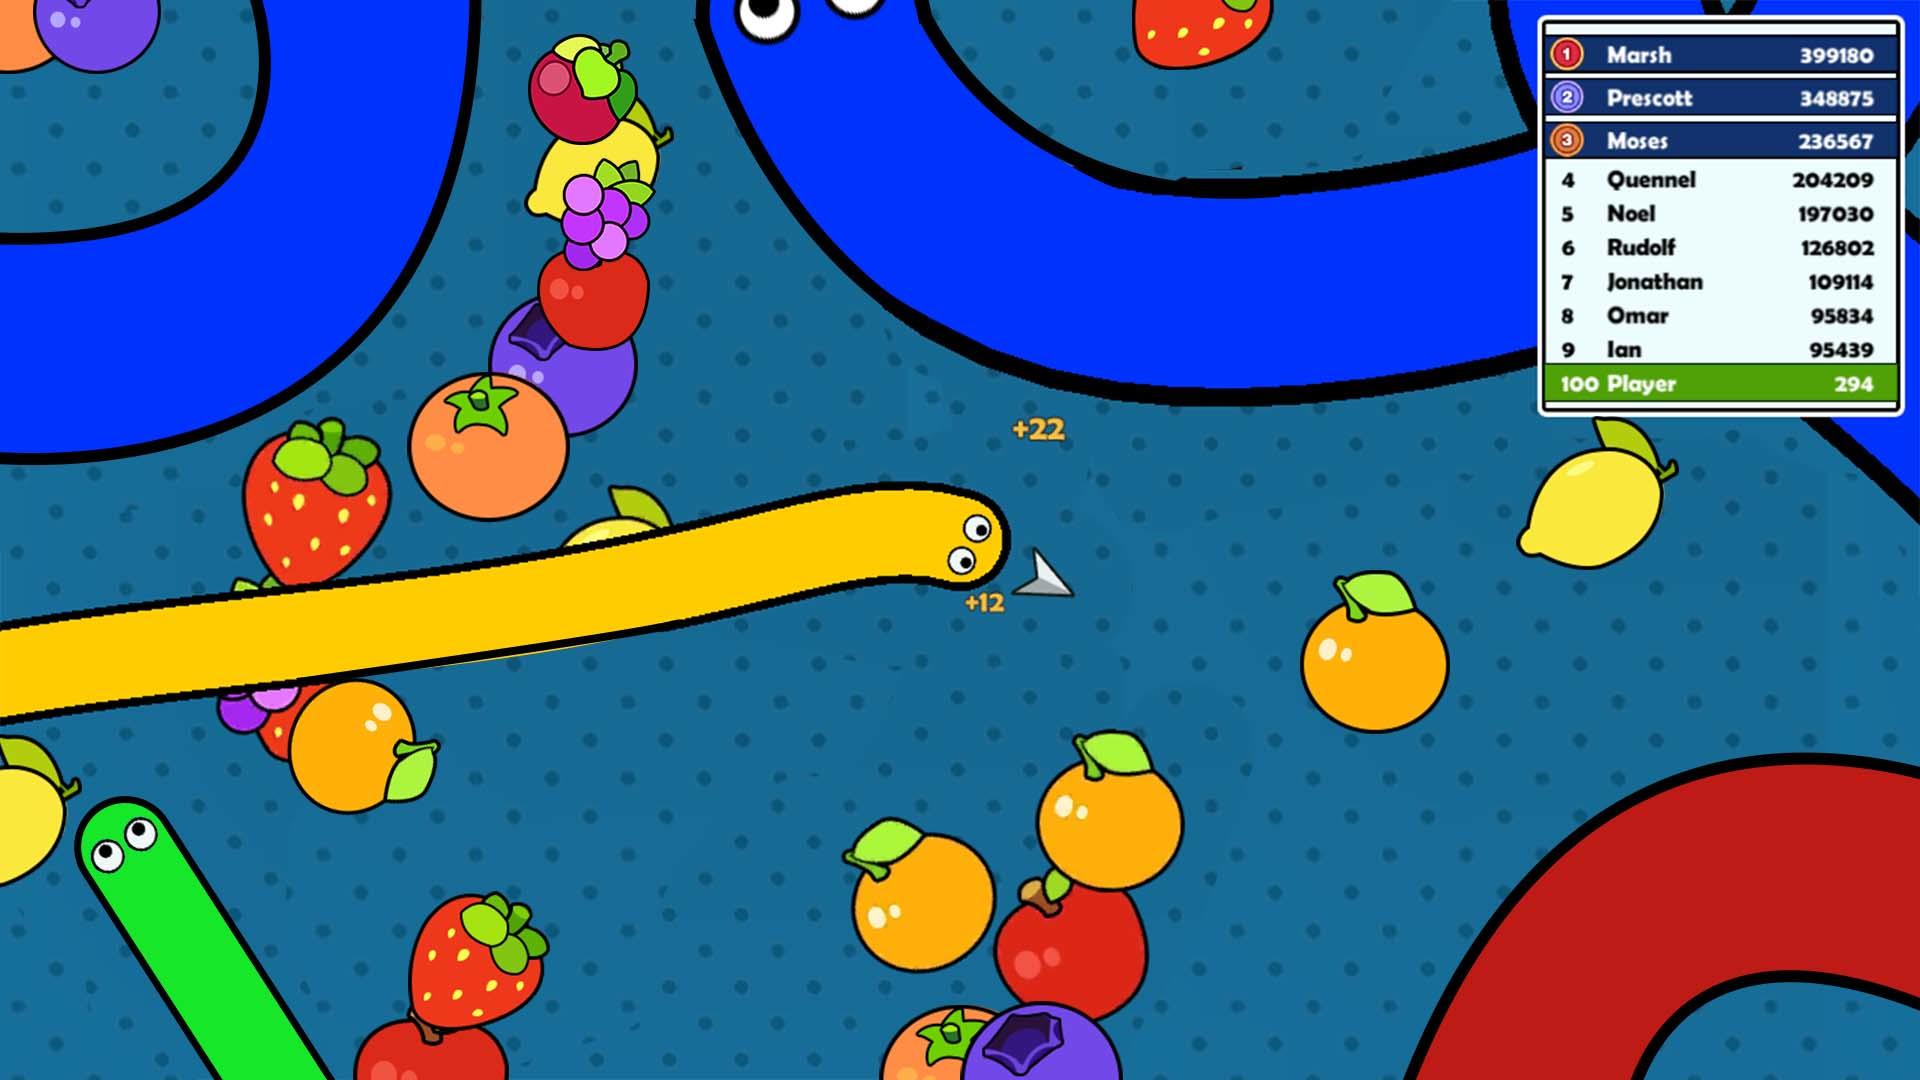 Snake Doodle - Worm .io Game para Android - Download